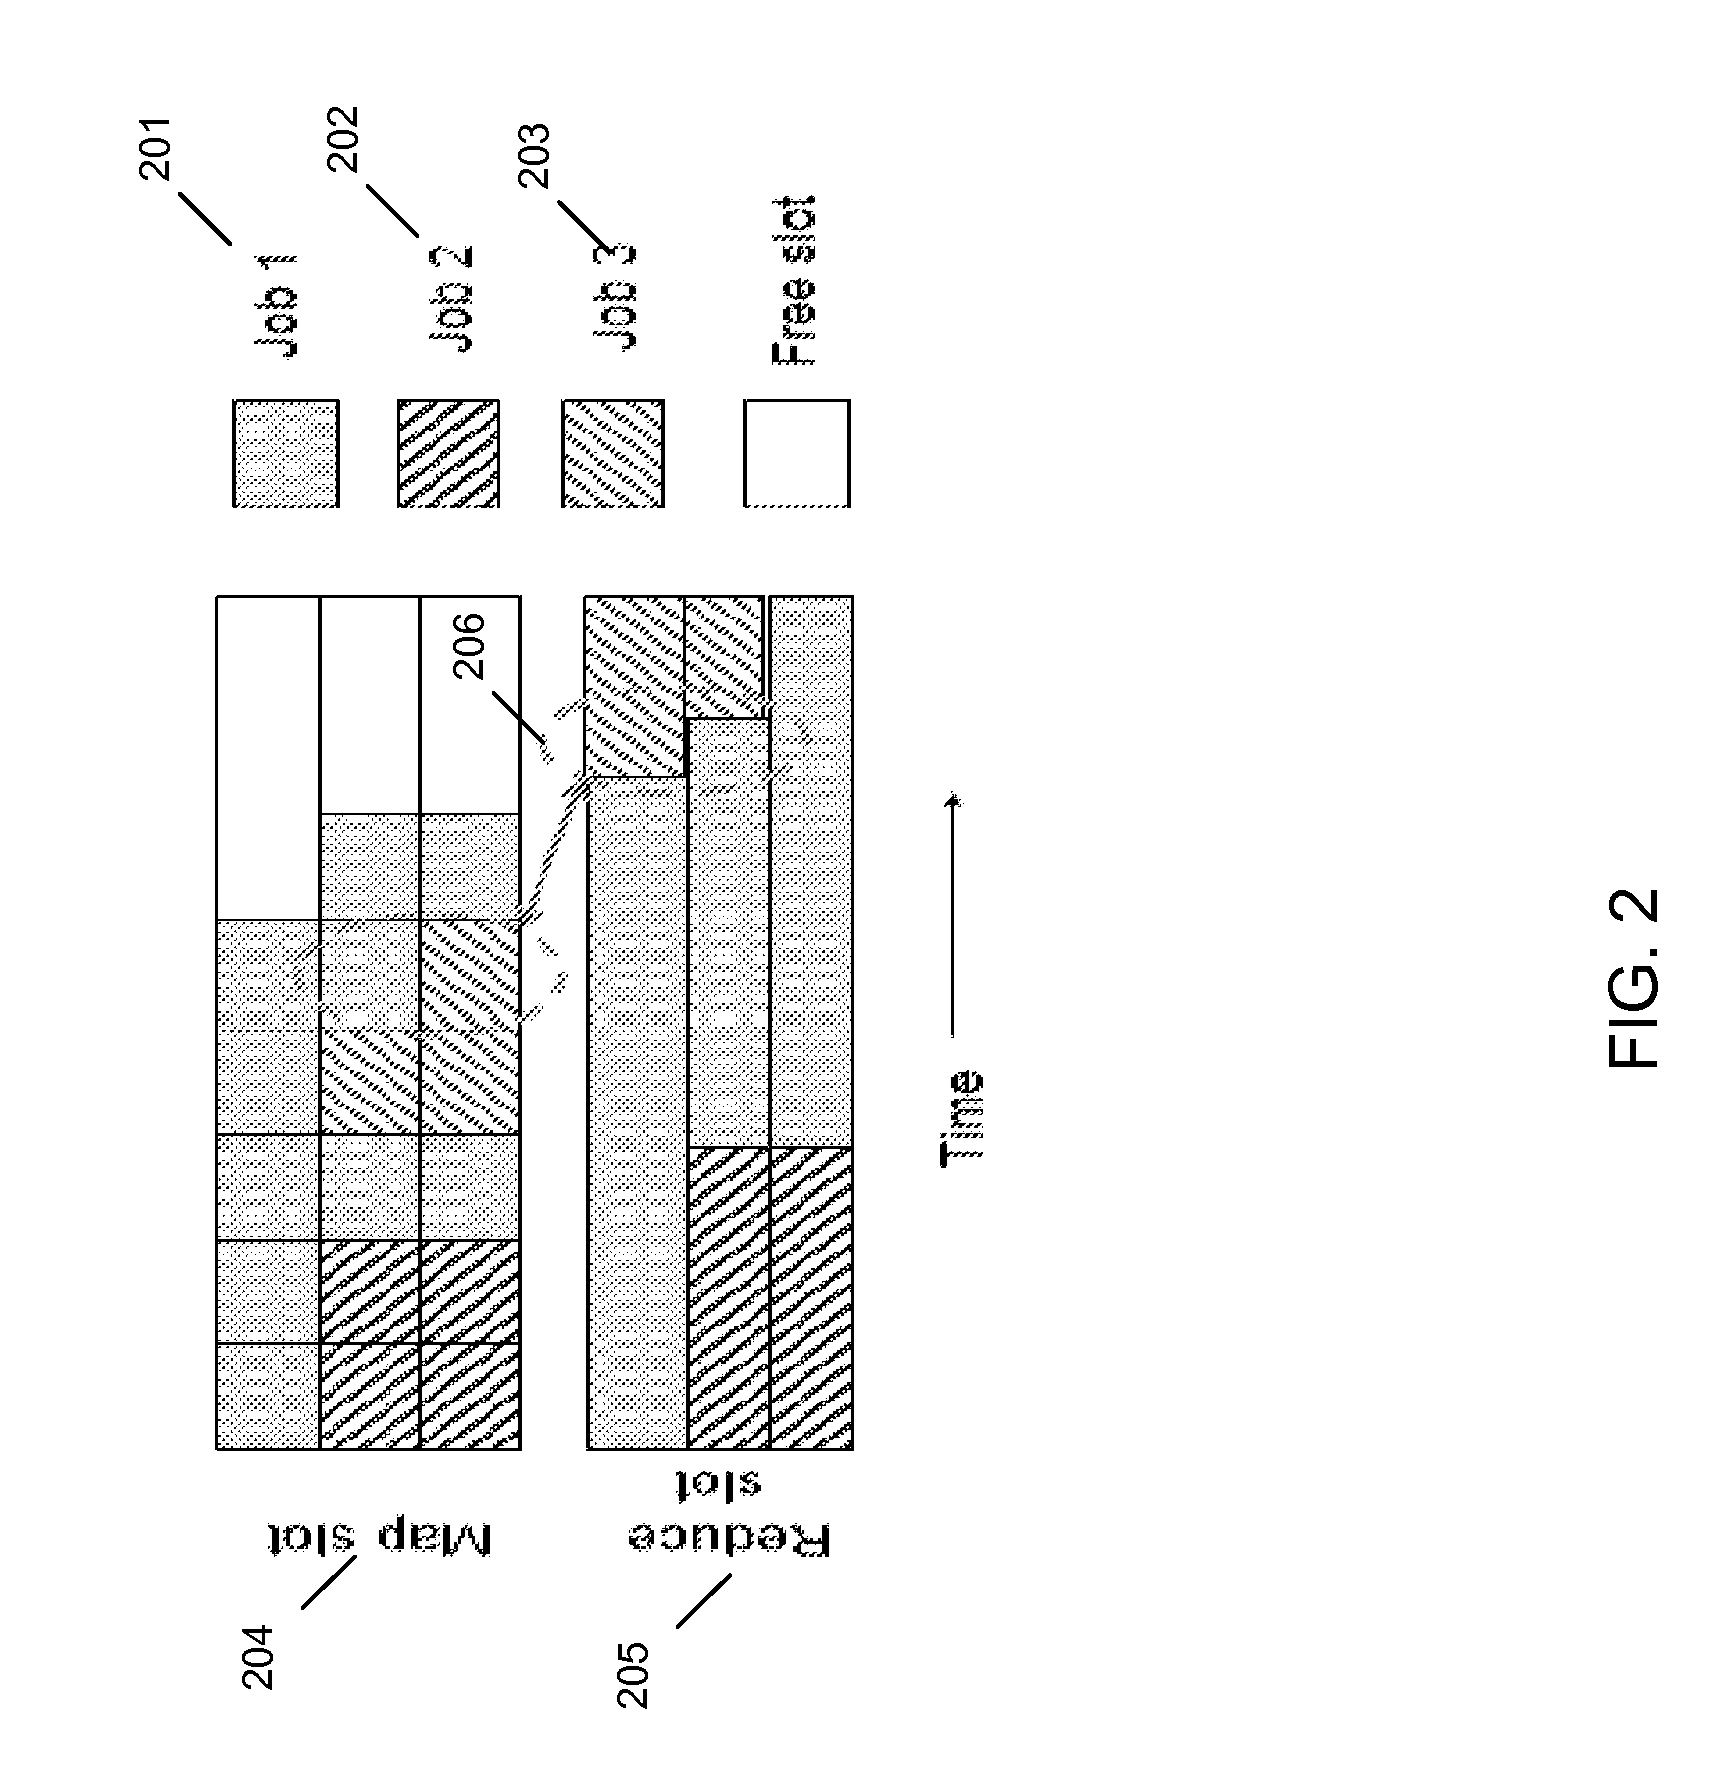 Resource aware scheduling in a distributed computing environment